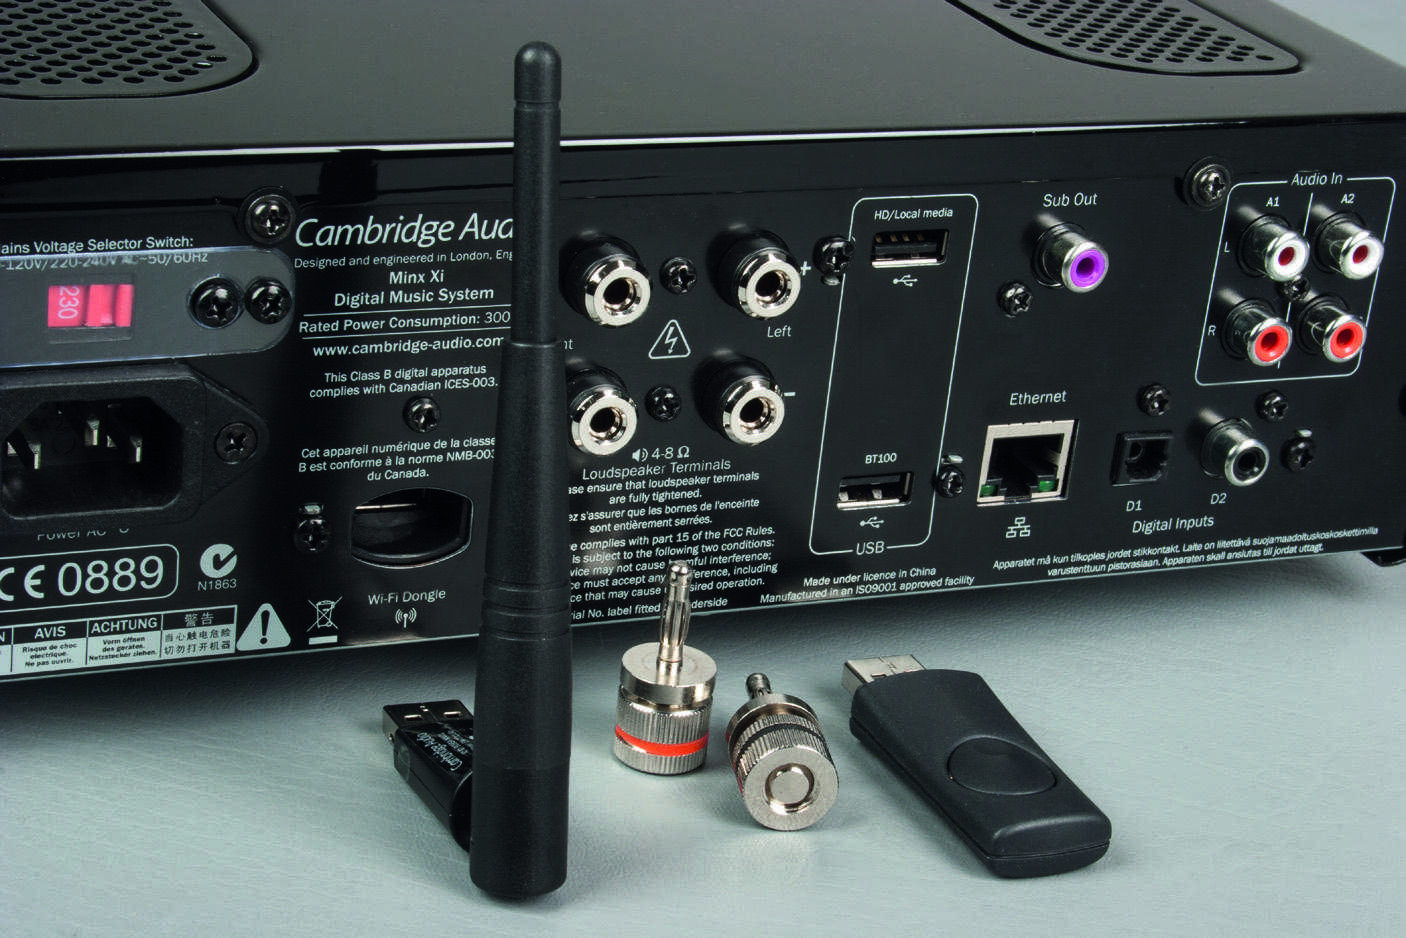 Cambridge audio minx xi review: give all your digital audio a big upgrade – for a price